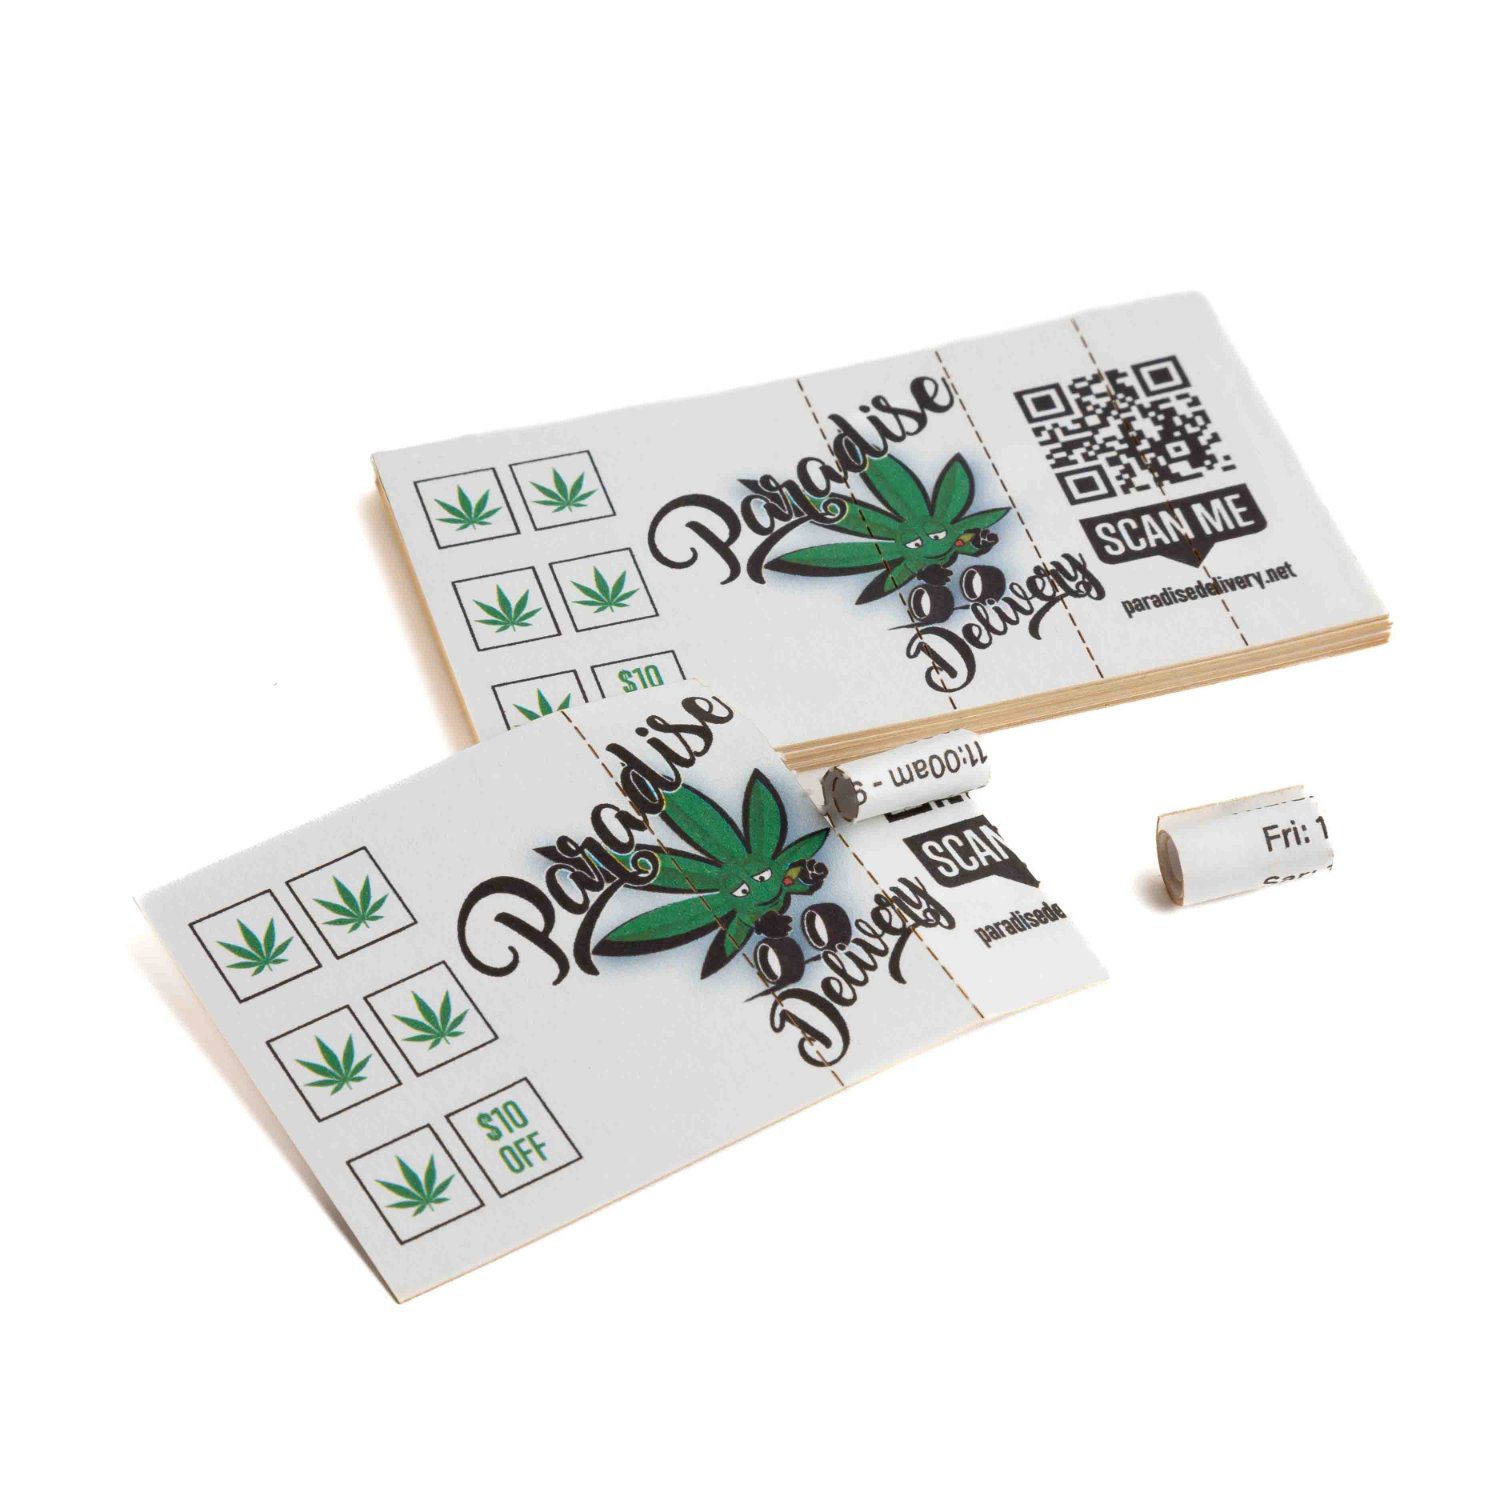 Filter Tip Business Cards Perforated for Cannabis Professionals